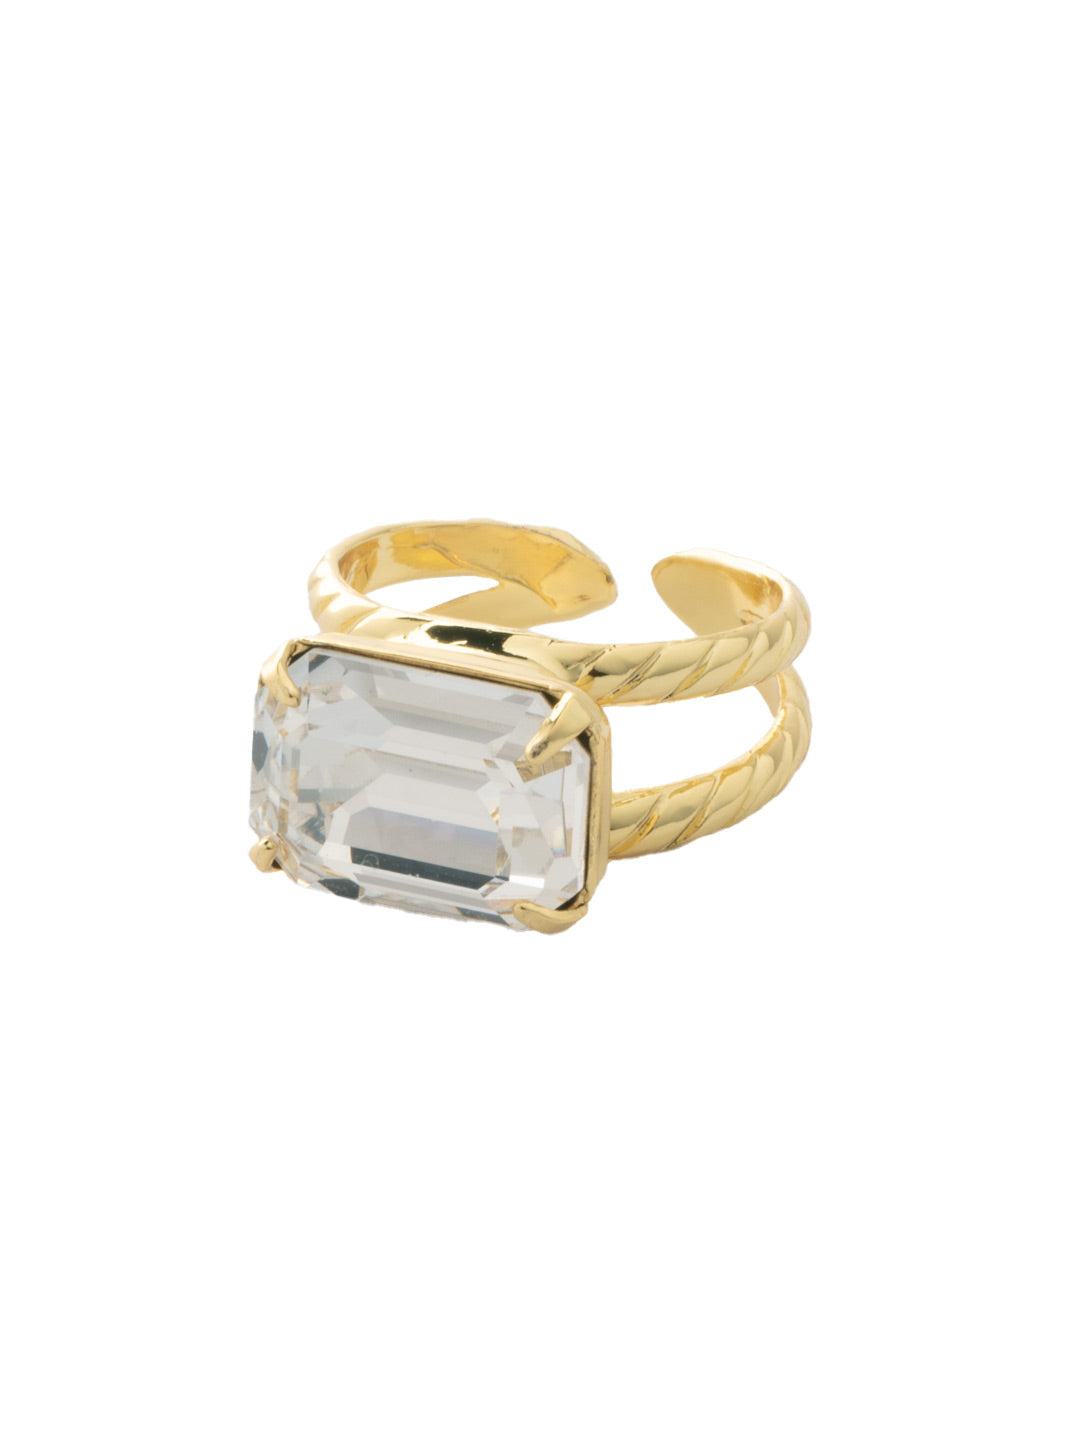 Emerald Cocktail Ring - RFL88BGCRY - <p>The Emerald Cocktail Ring features a single emerald cut crystal on an adjustable ring band. From Sorrelli's Crystal collection in our Bright Gold-tone finish.</p>